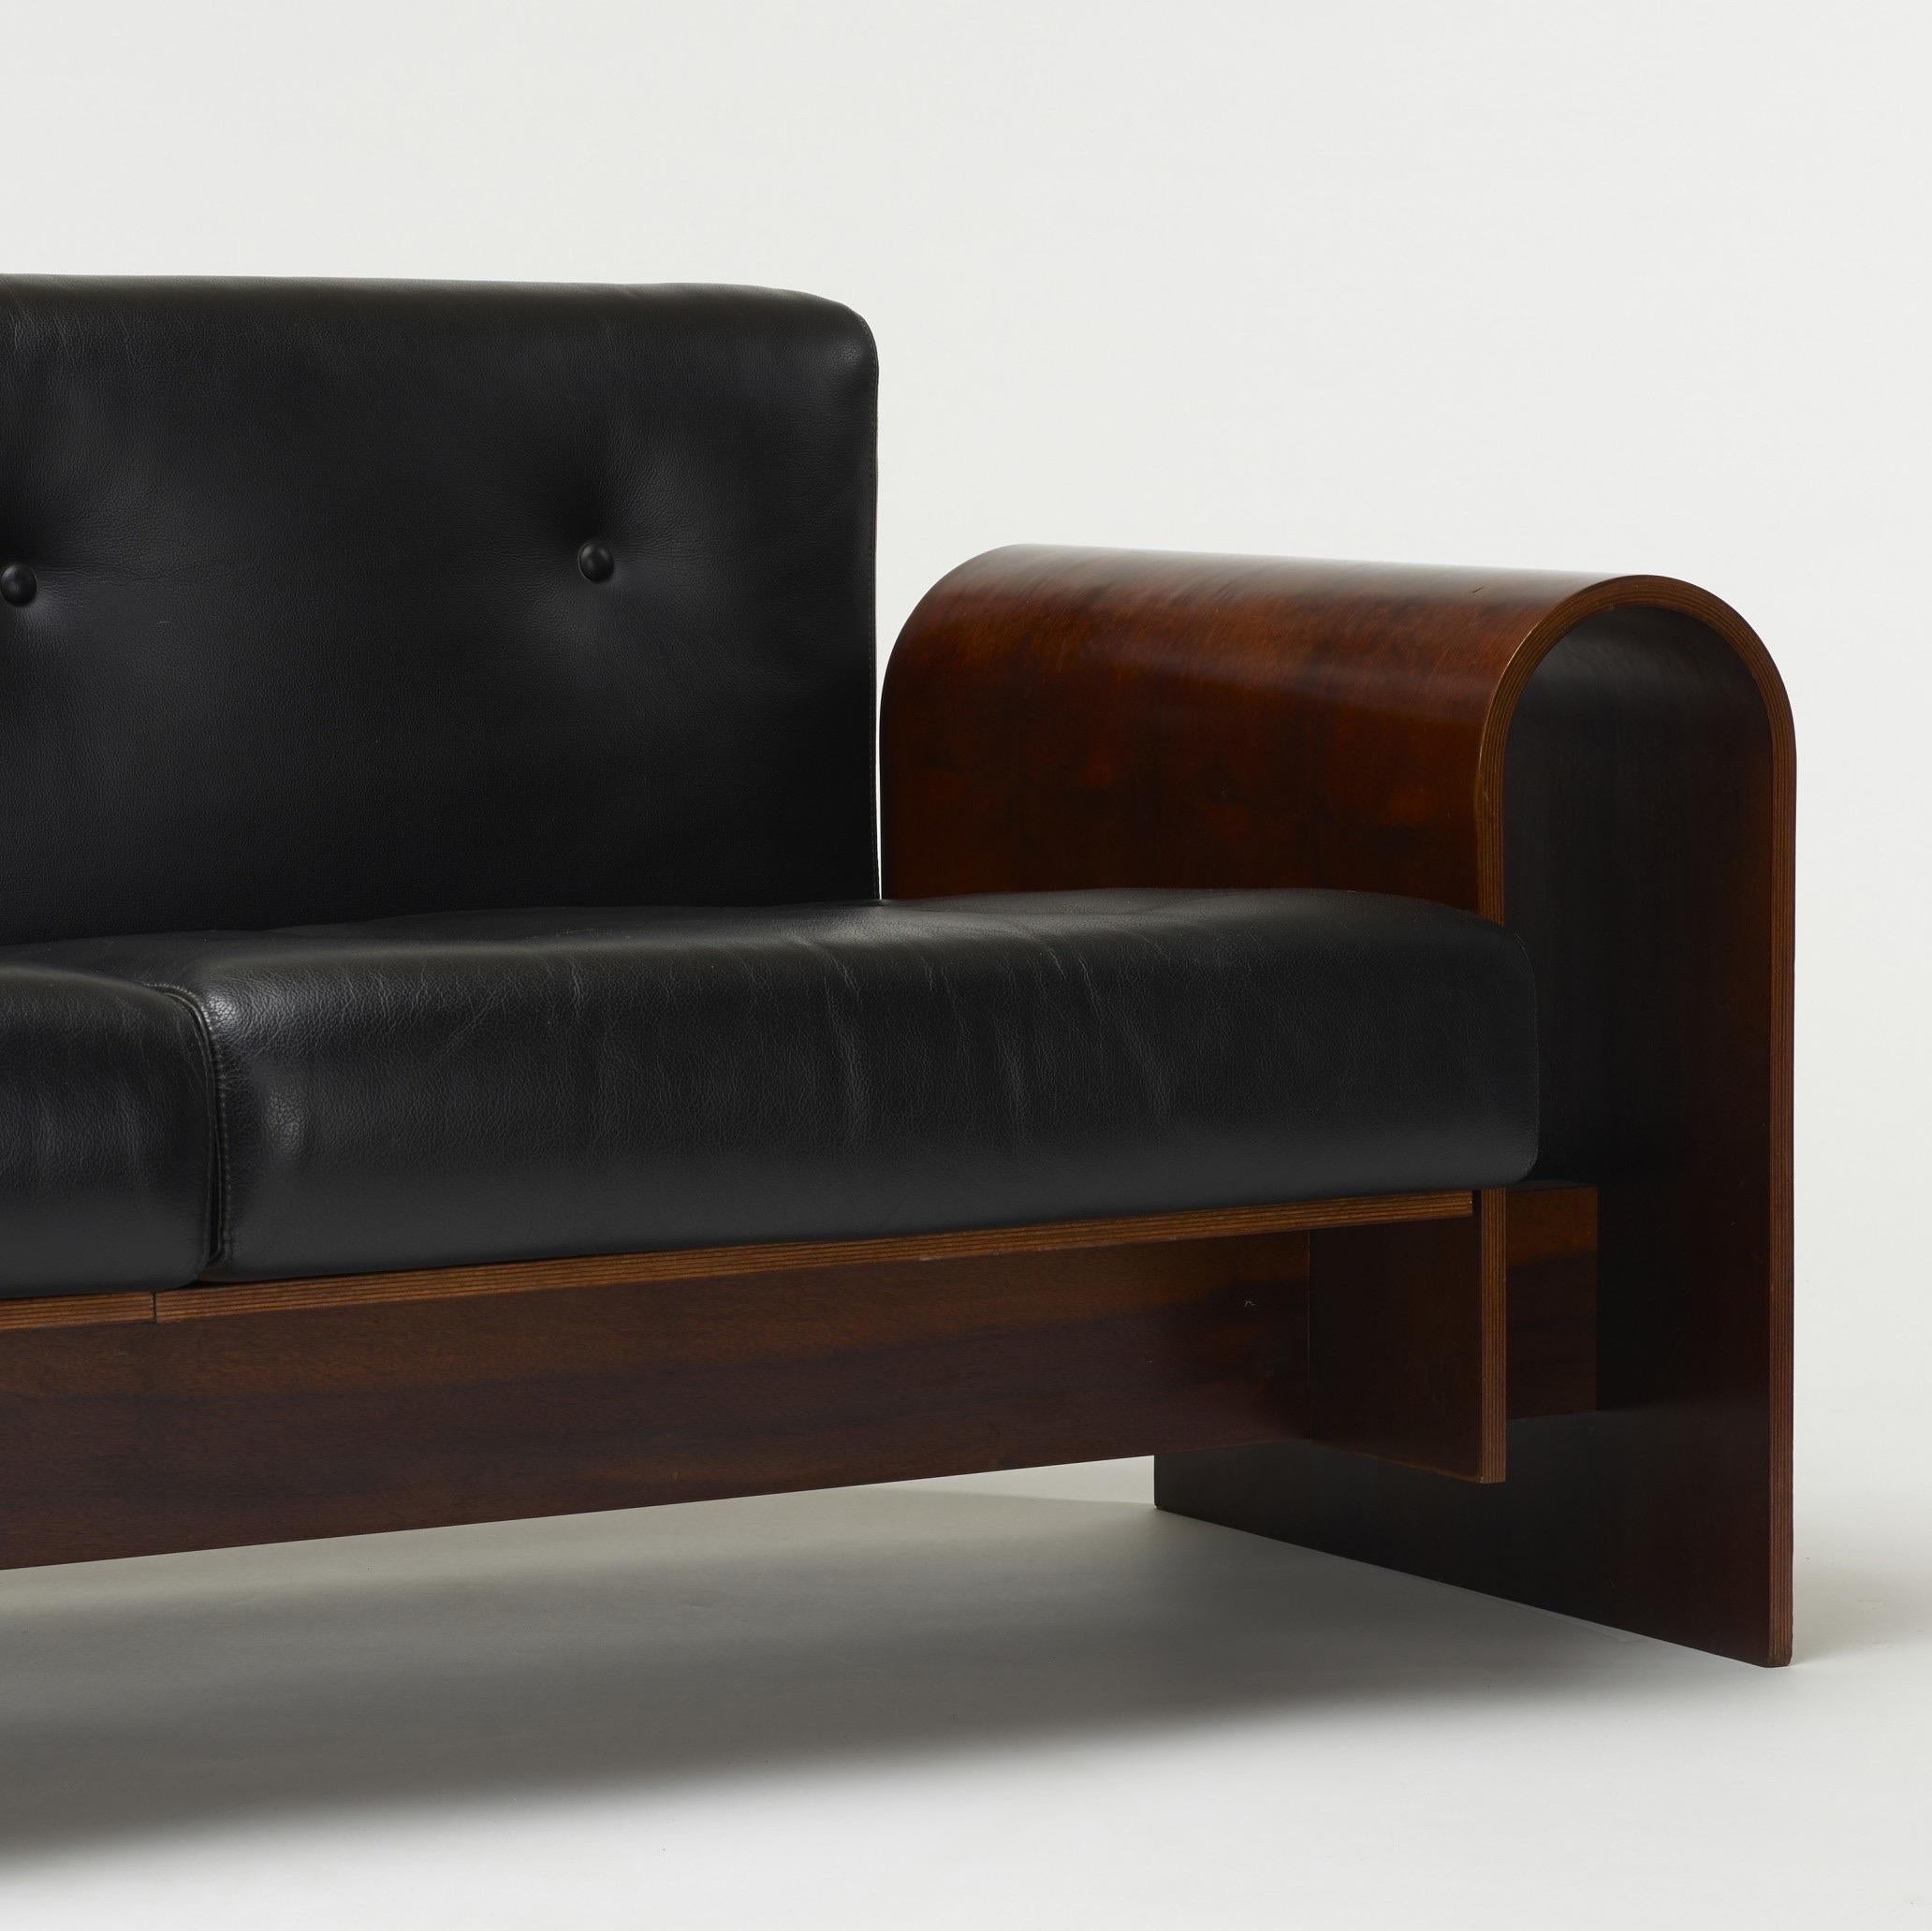 Brazilian Oscar Niemeyer Exceptional Sofa in Rosewood and Leather, Hotel SESC, Brazil 1990 For Sale